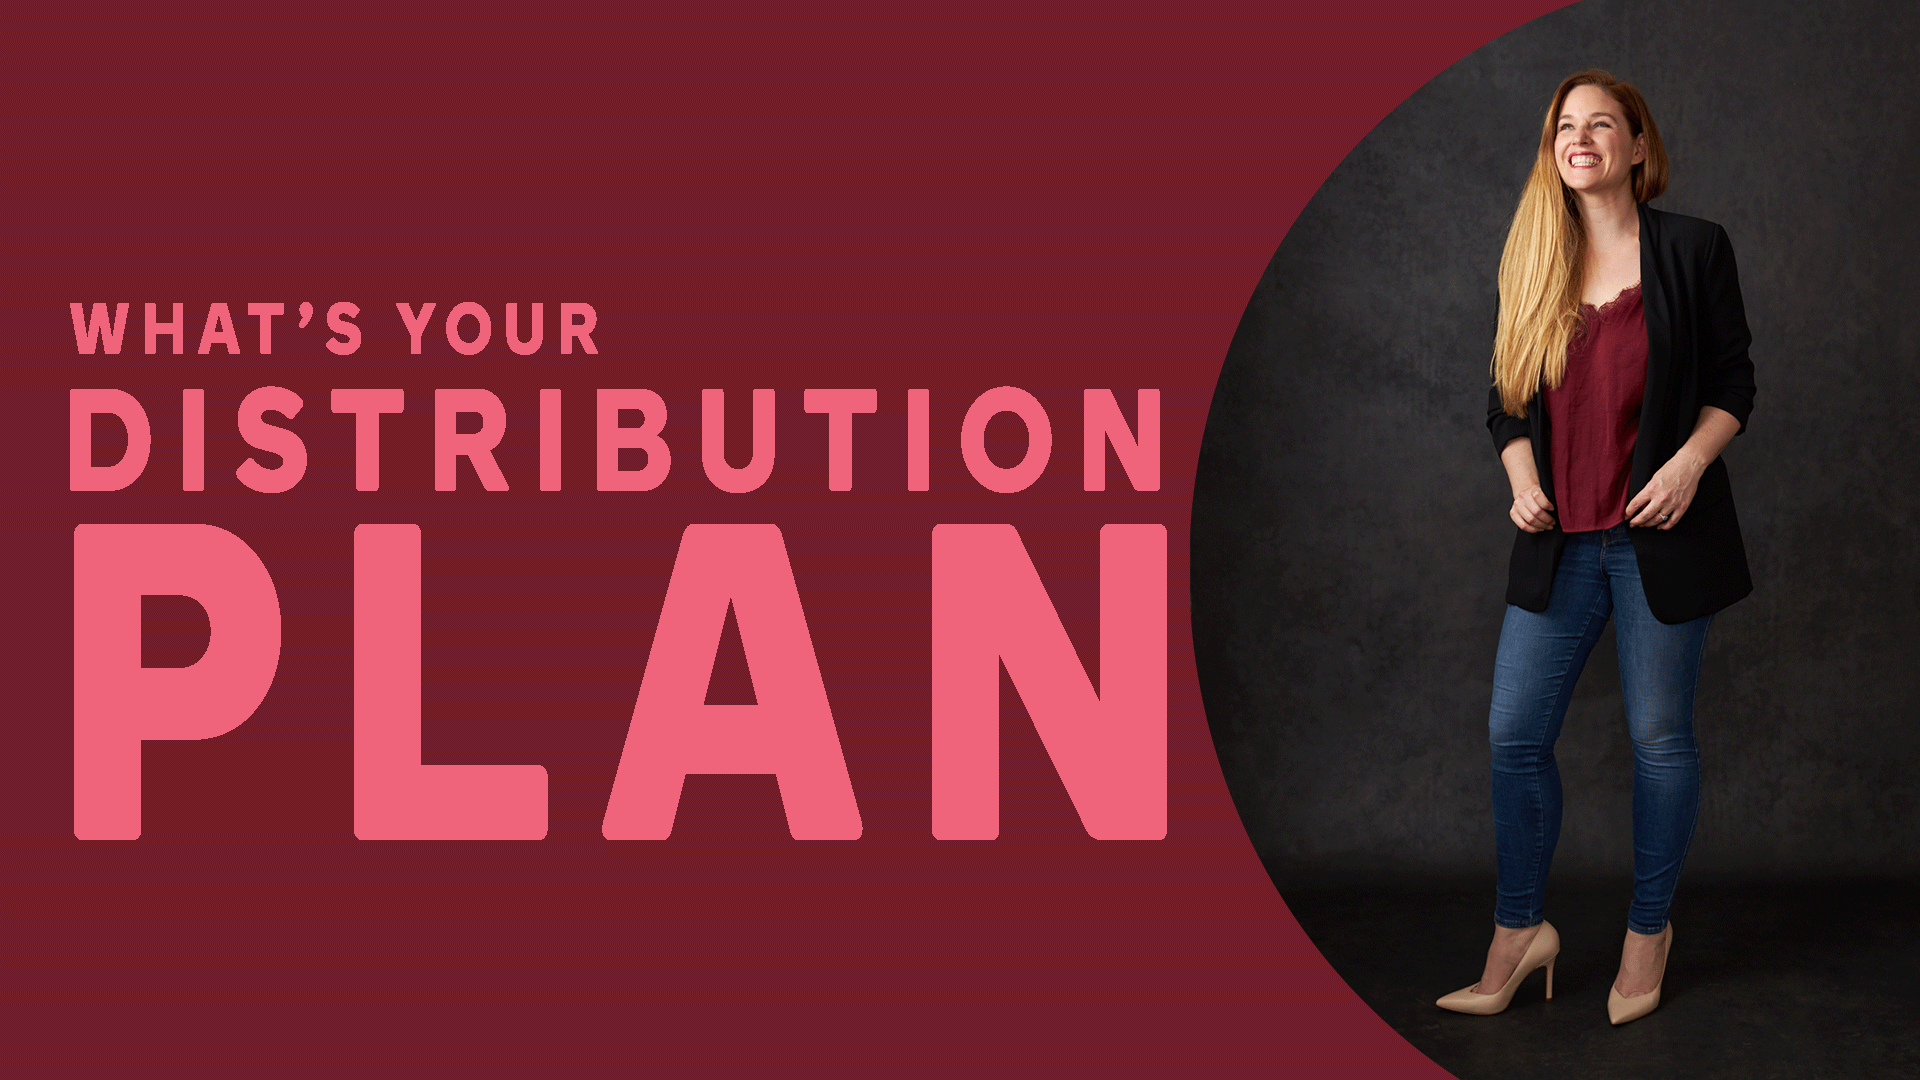 VLOG 2 – Distribution Plan for Video Content